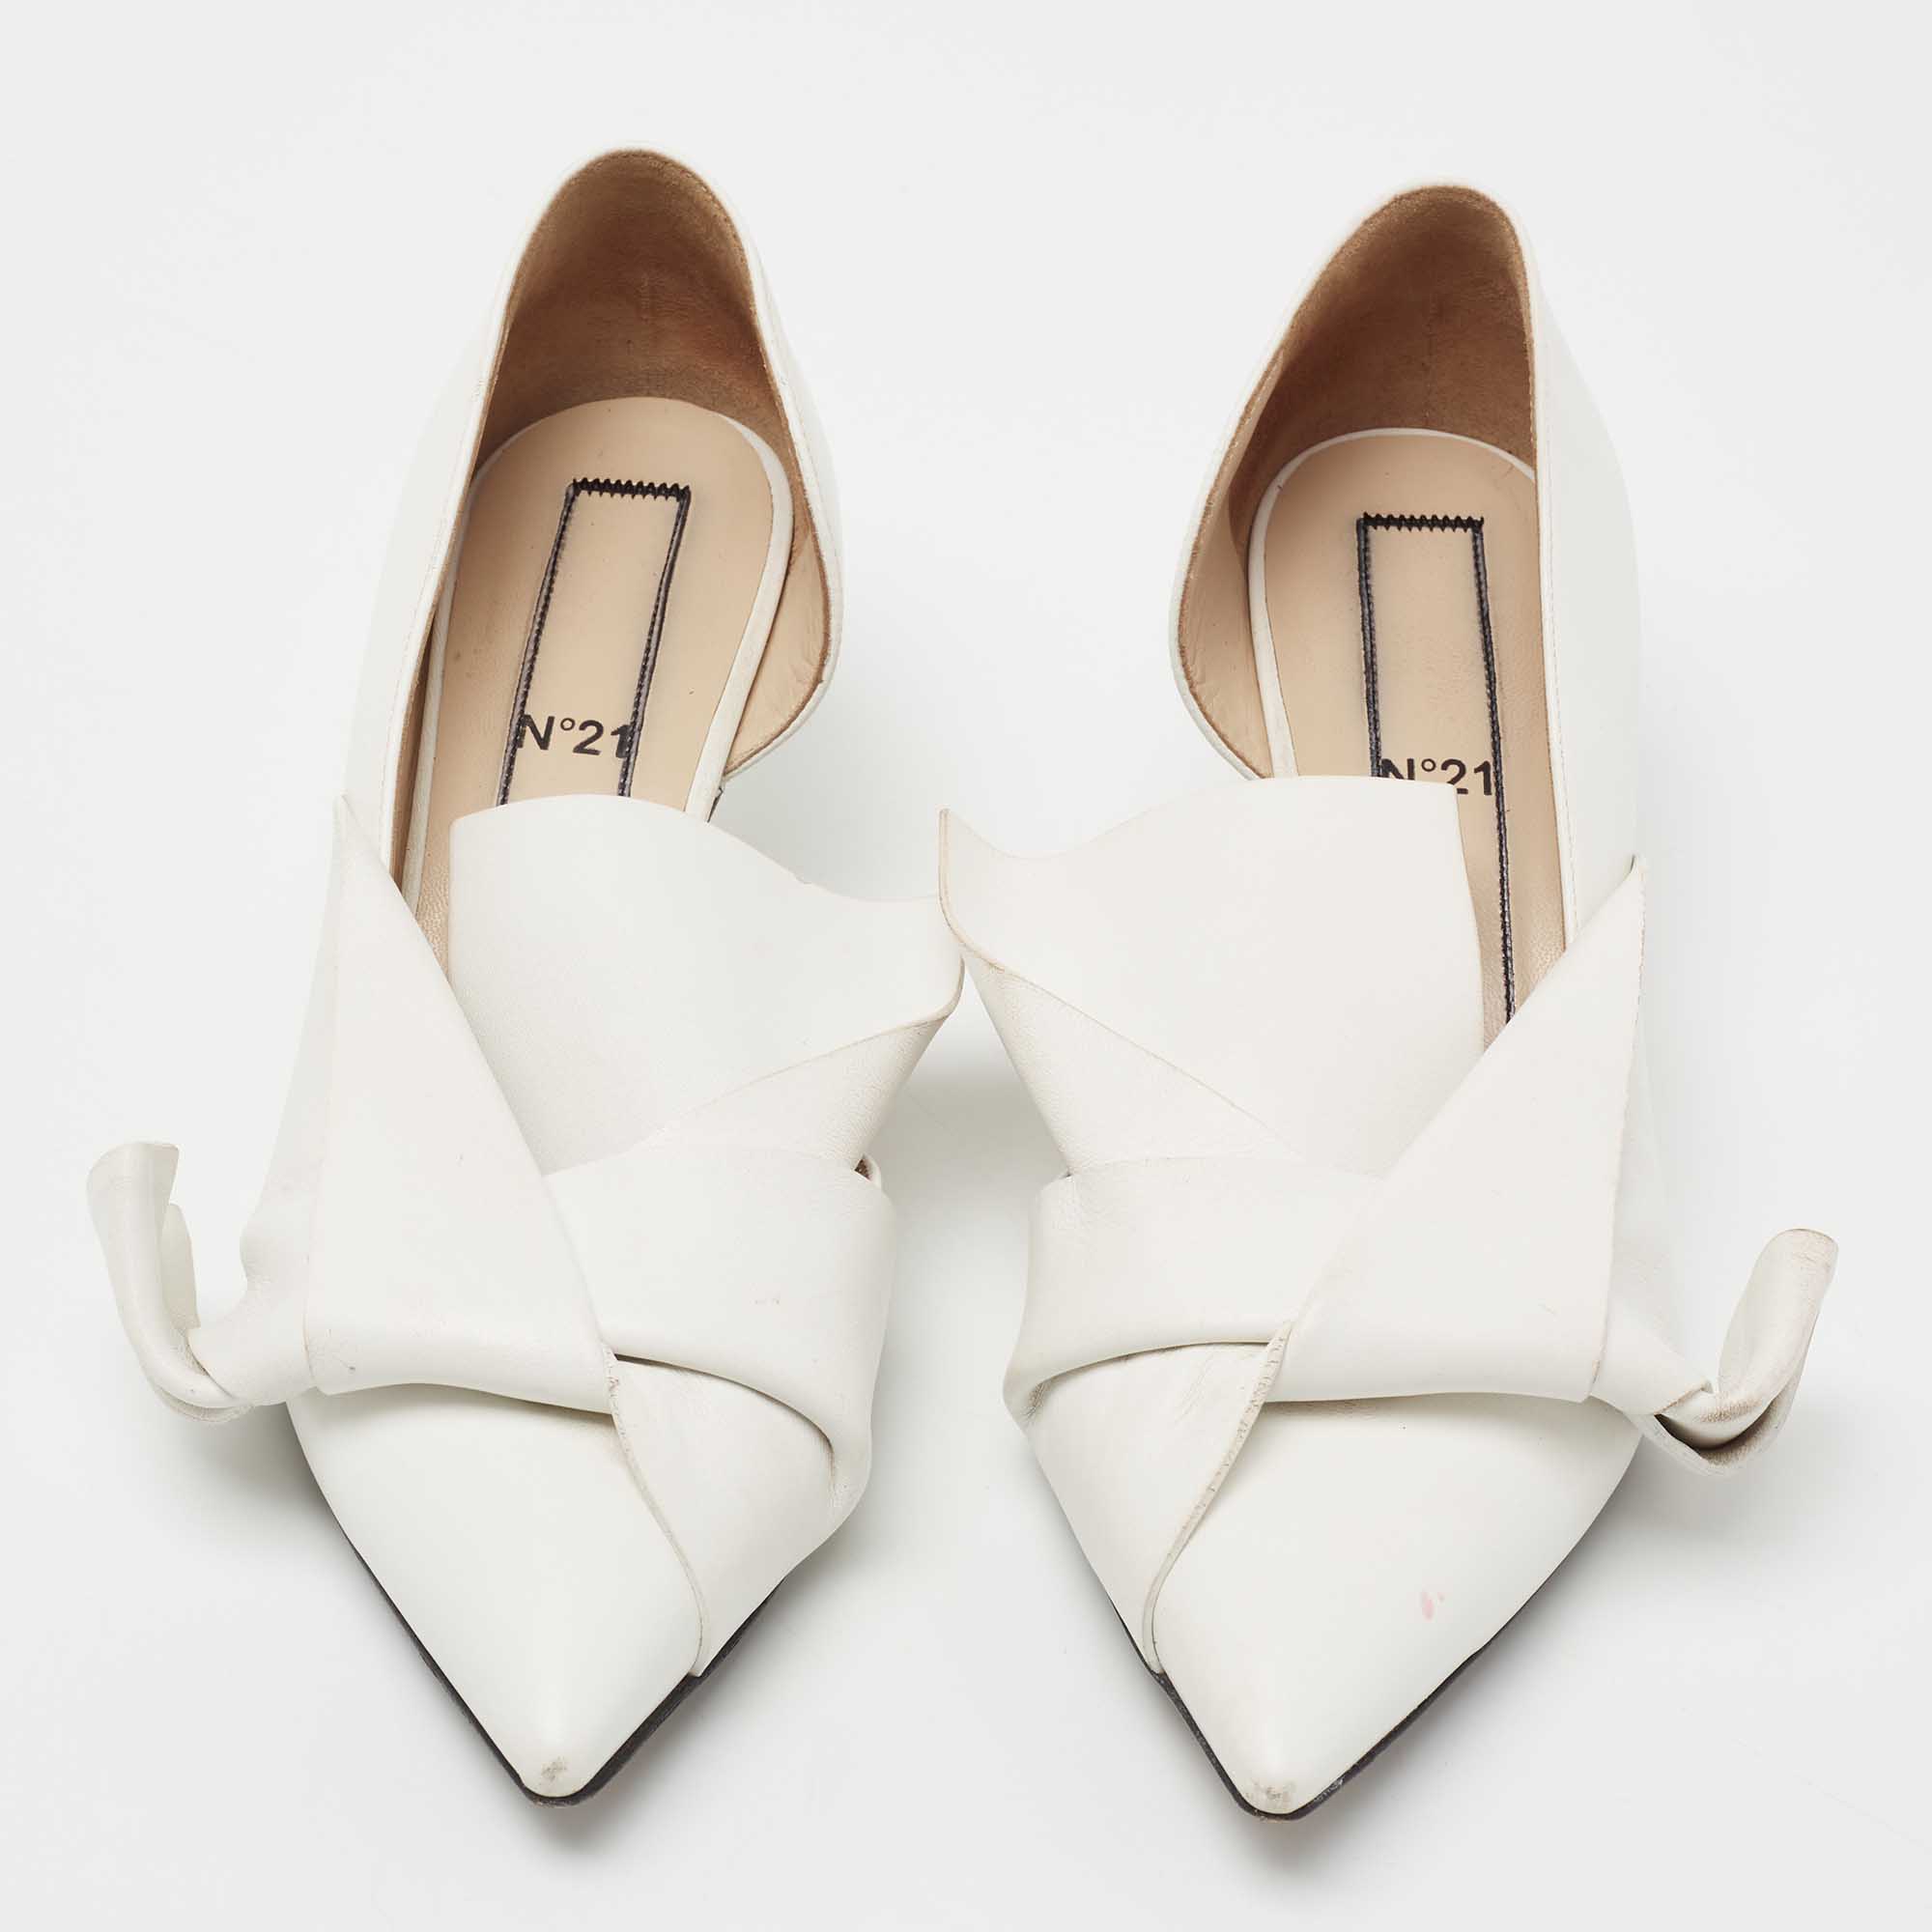 Nº21 White Leather Knot Pointed Toe Kitten Pumps Size 38.5